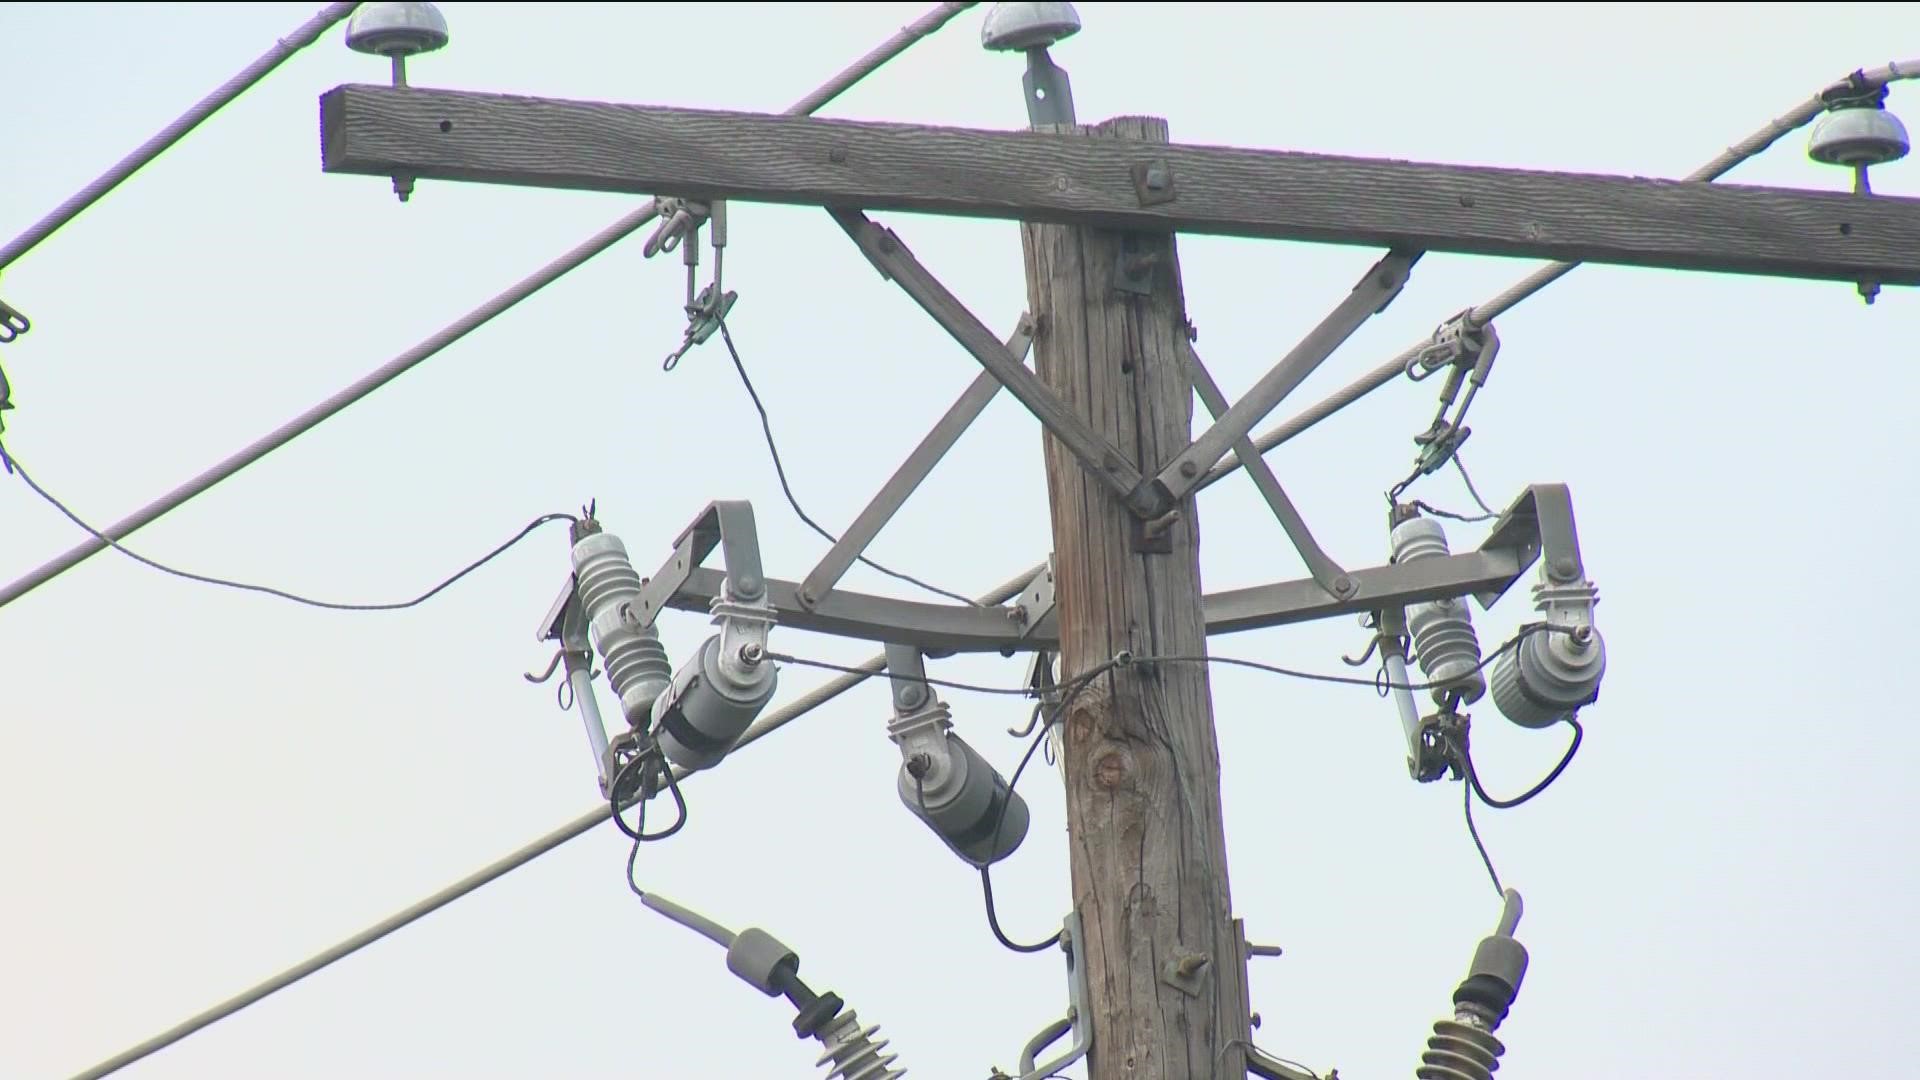 Another power plant is coming to Central Texas to help ensure the state's power supply.